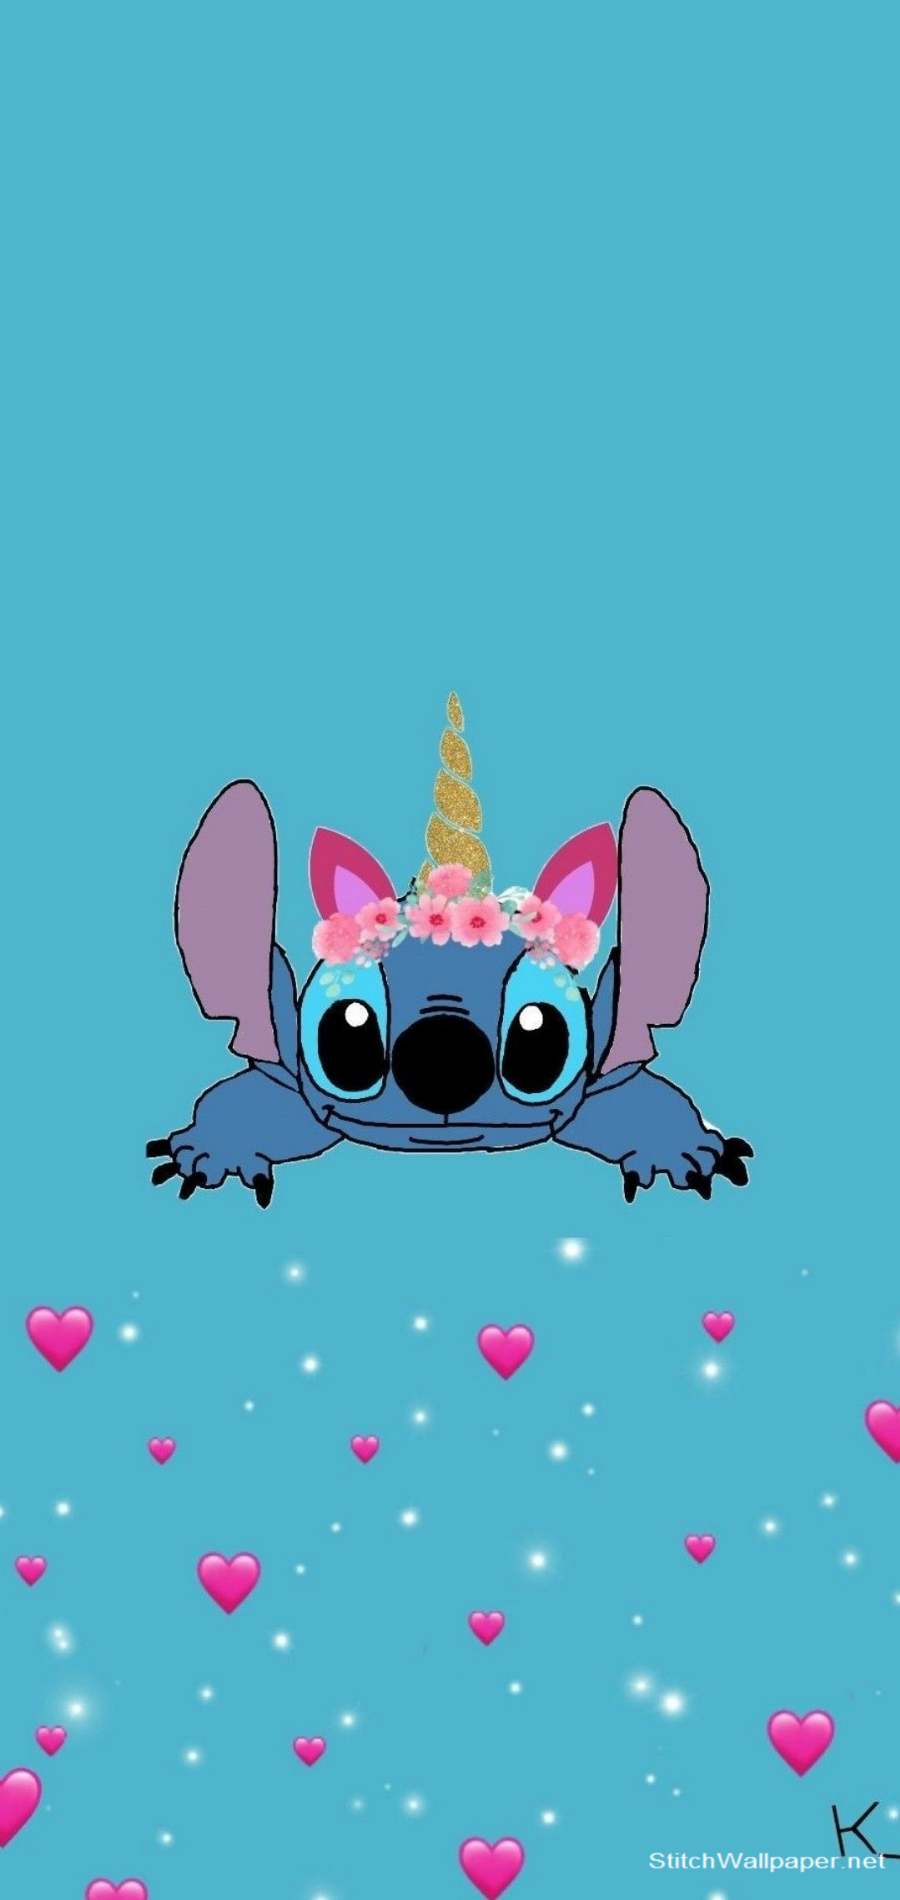 stitch wallpapers for free